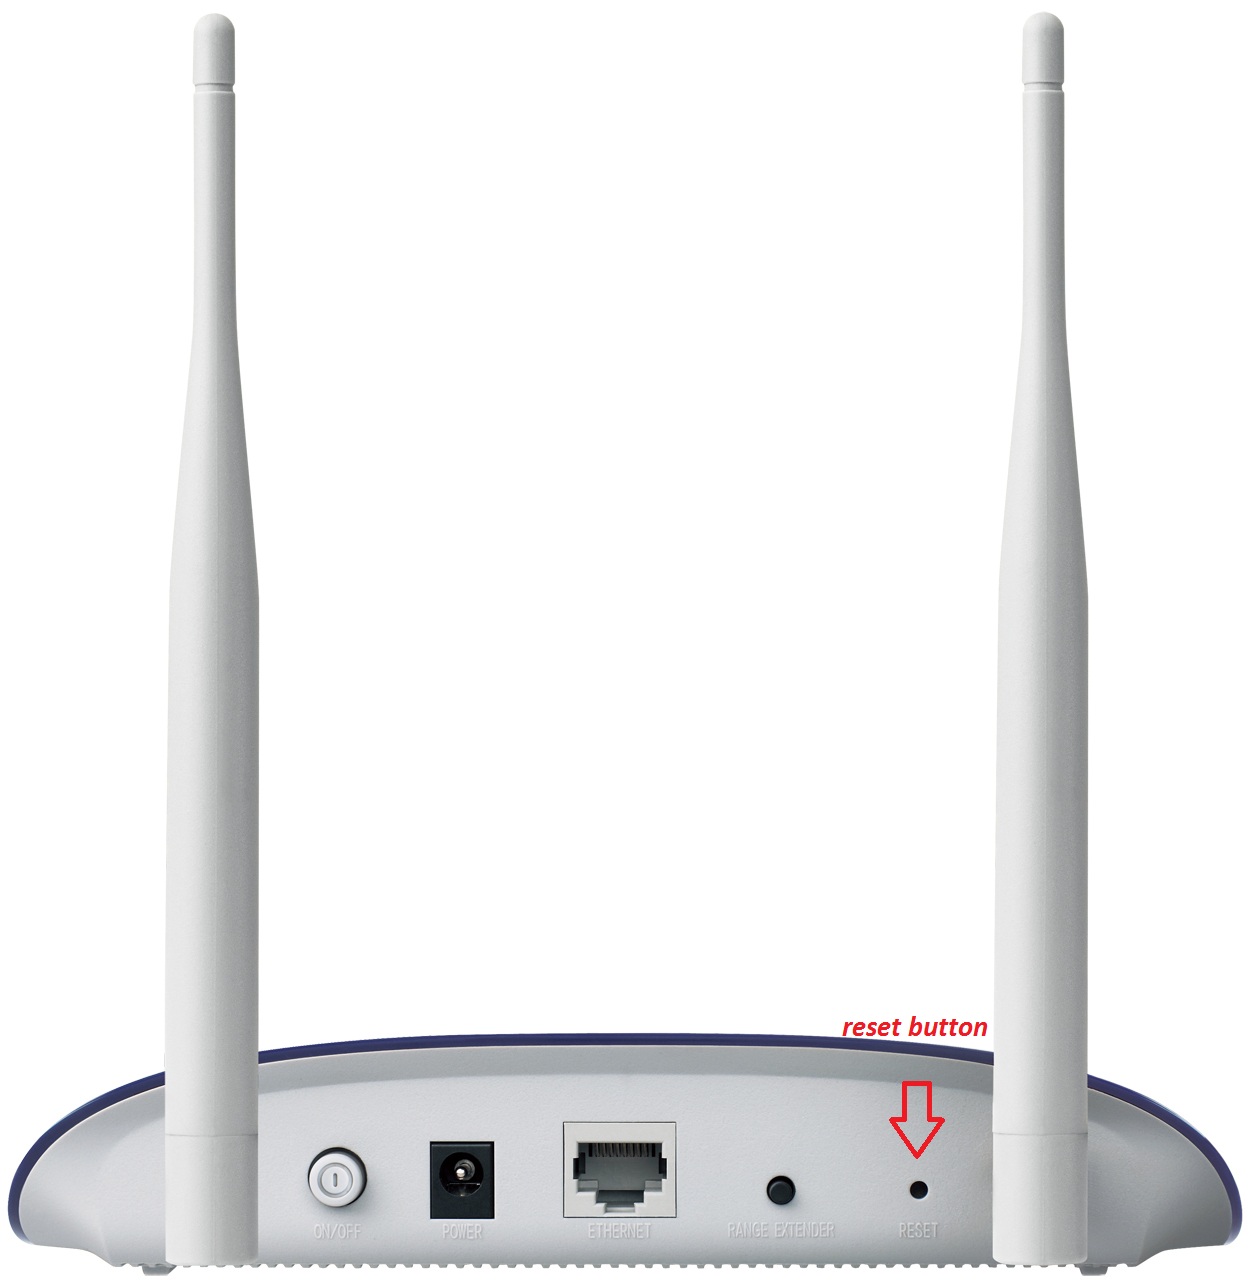 Hard reset TP-LINK TL-WA14RE - How to Hard Reset Your Router